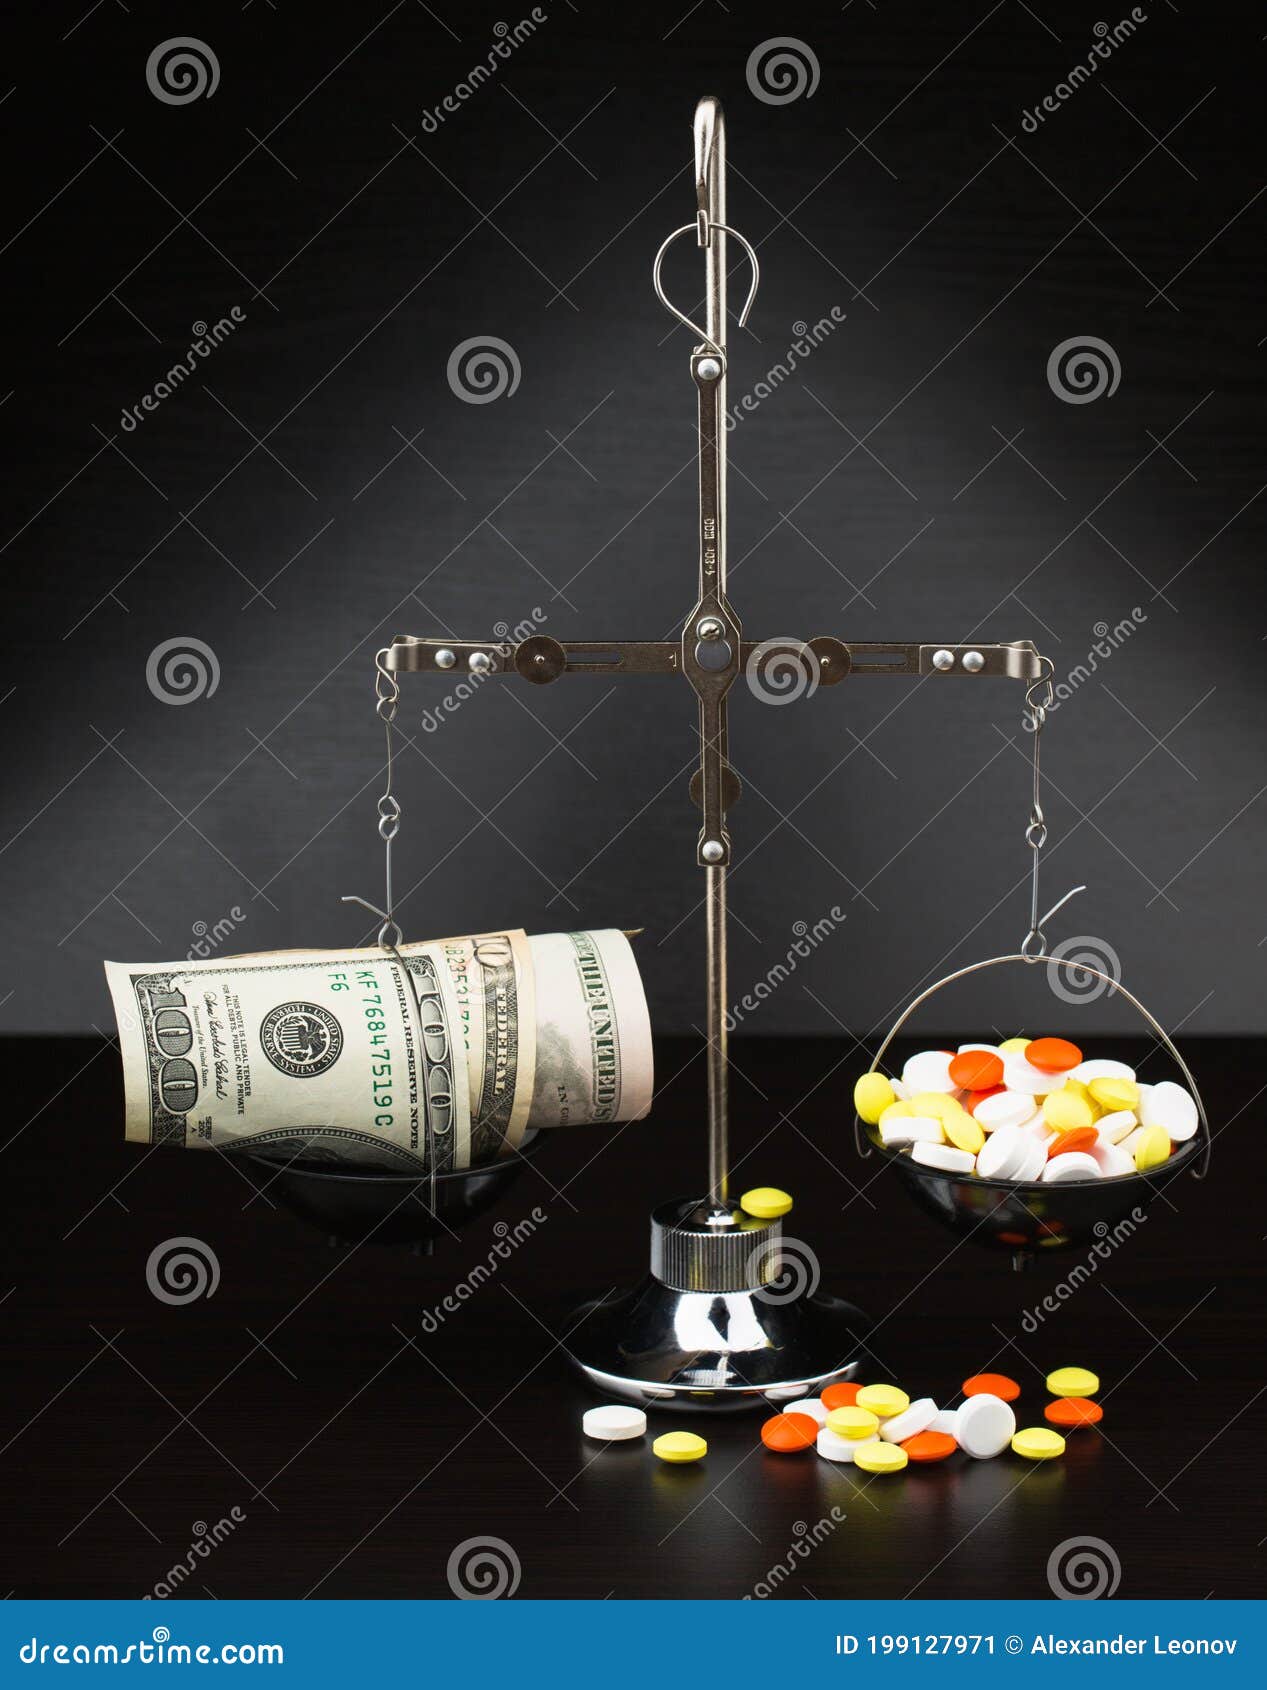 https://thumbs.dreamstime.com/z/scales-scales-money-lot-colored-pills-199127971.jpg